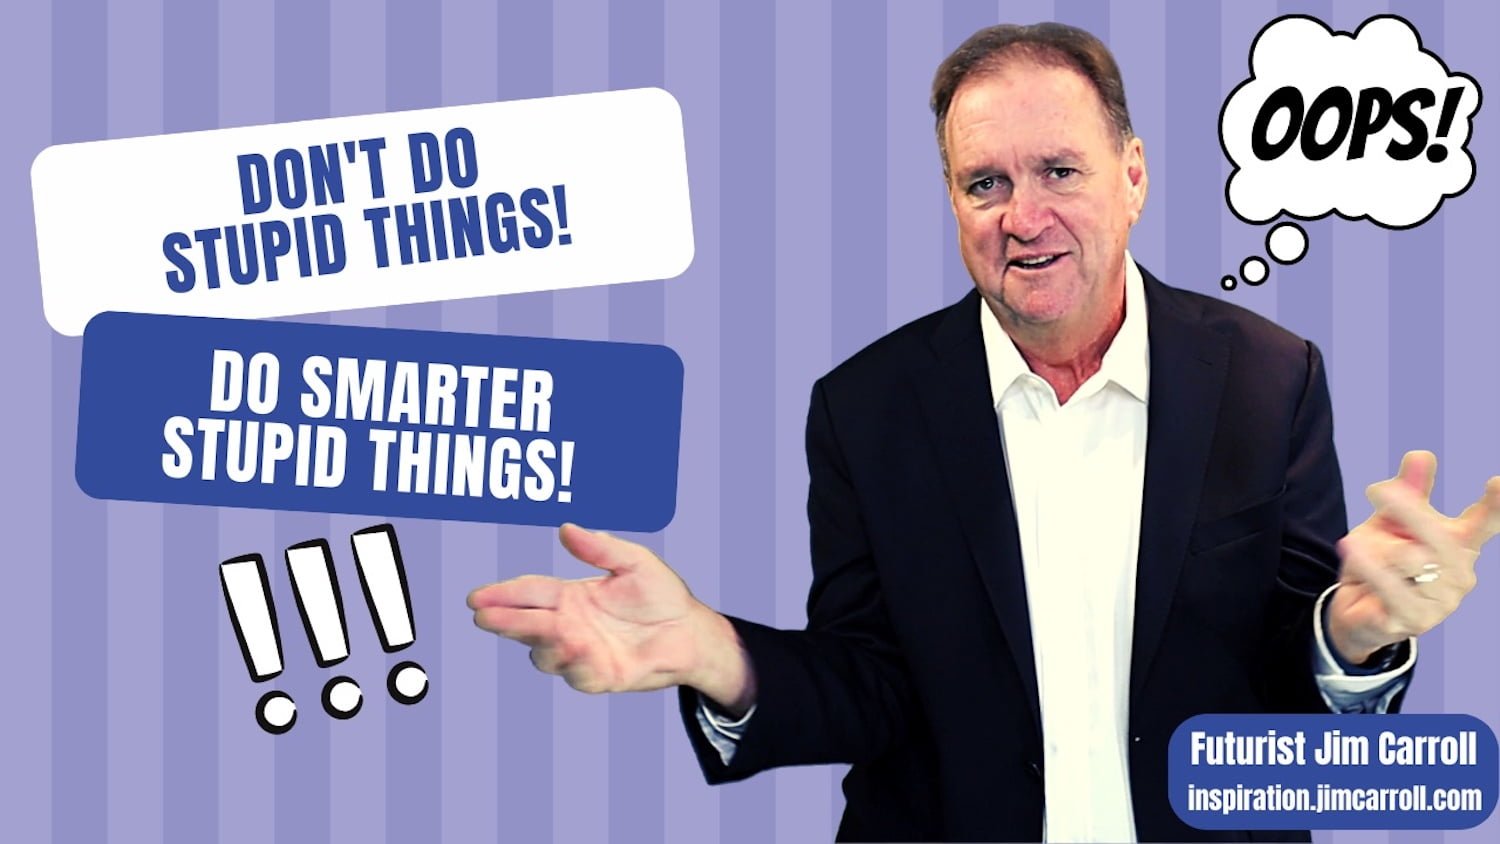 Daily Inspiration: "Don't do stupid things. Do smarter stupid things!"